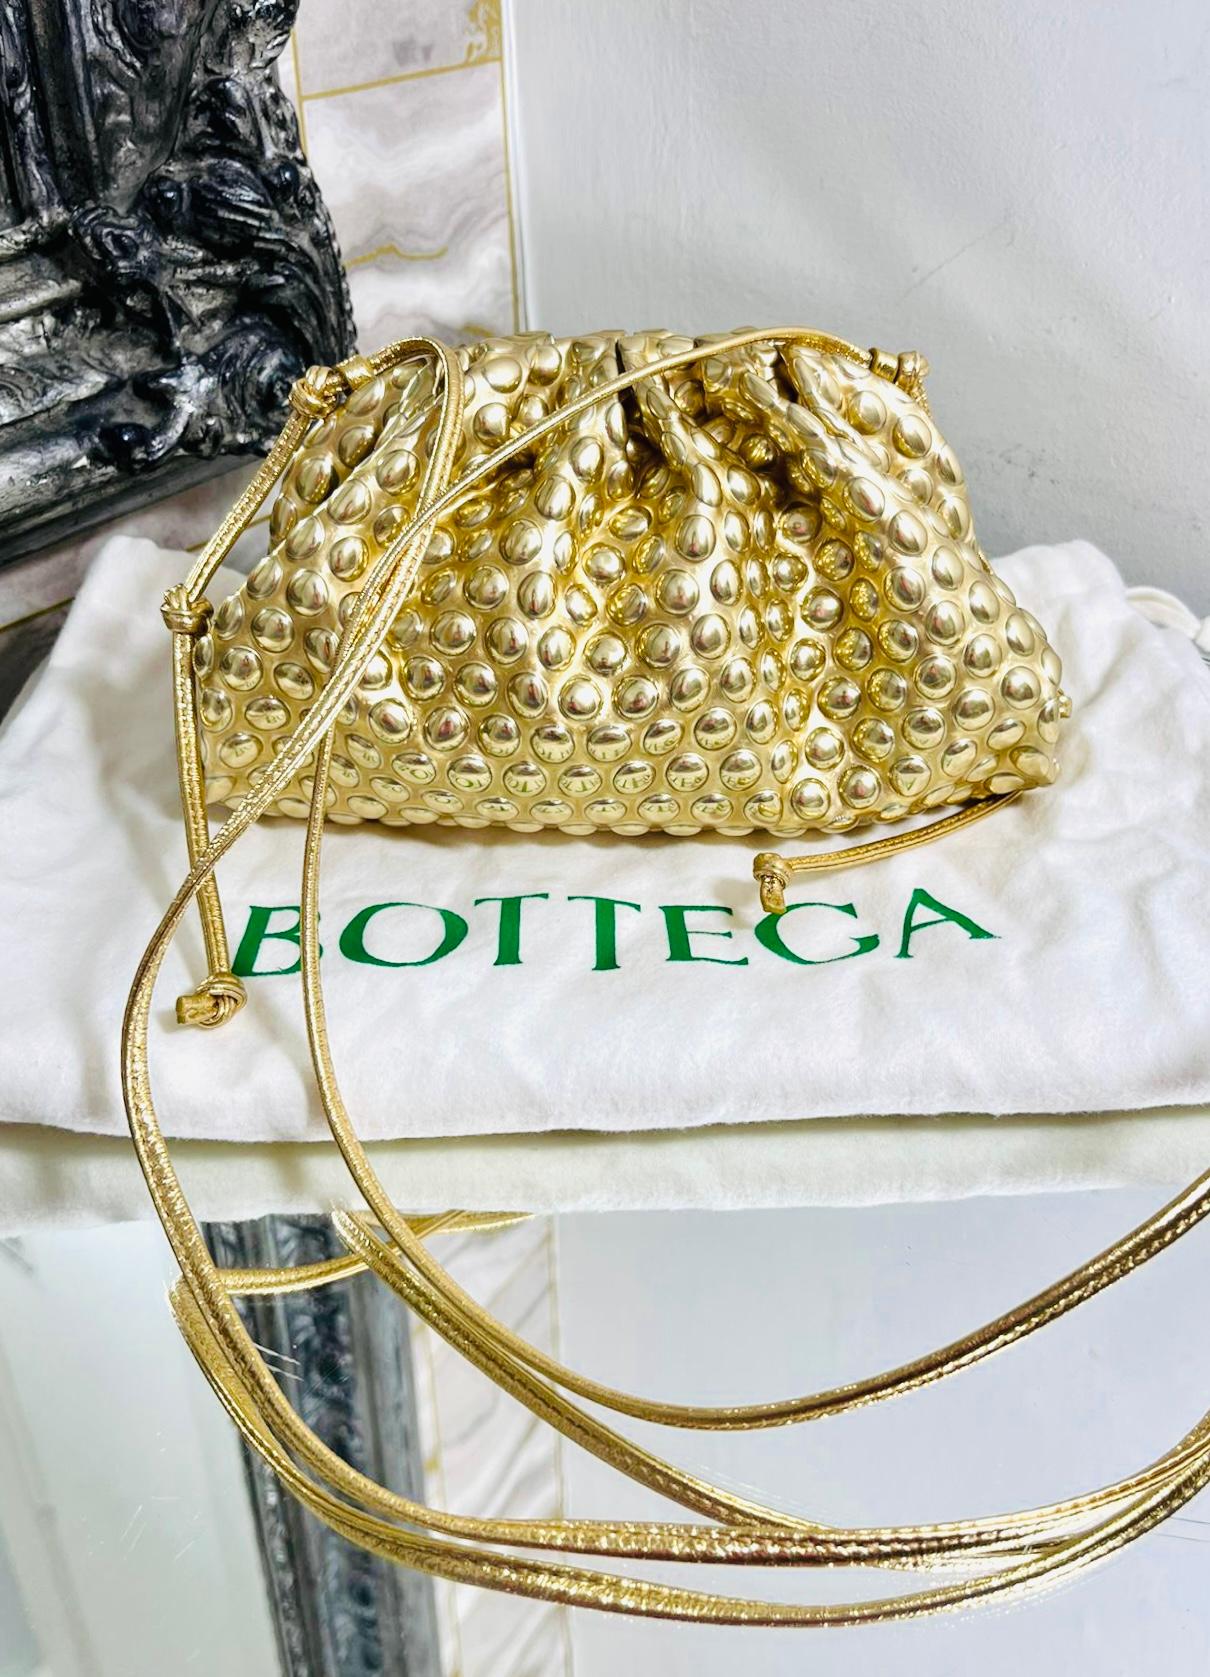 Bottega Veneta The Mini Pouch Crossbody Bag

Gold bag embossed with metallic dots pattern throughout.

Detailed with ruched magnetic frame top leading to silver interior.

Featuring long, thin leather crossbody strap accented with the brand's